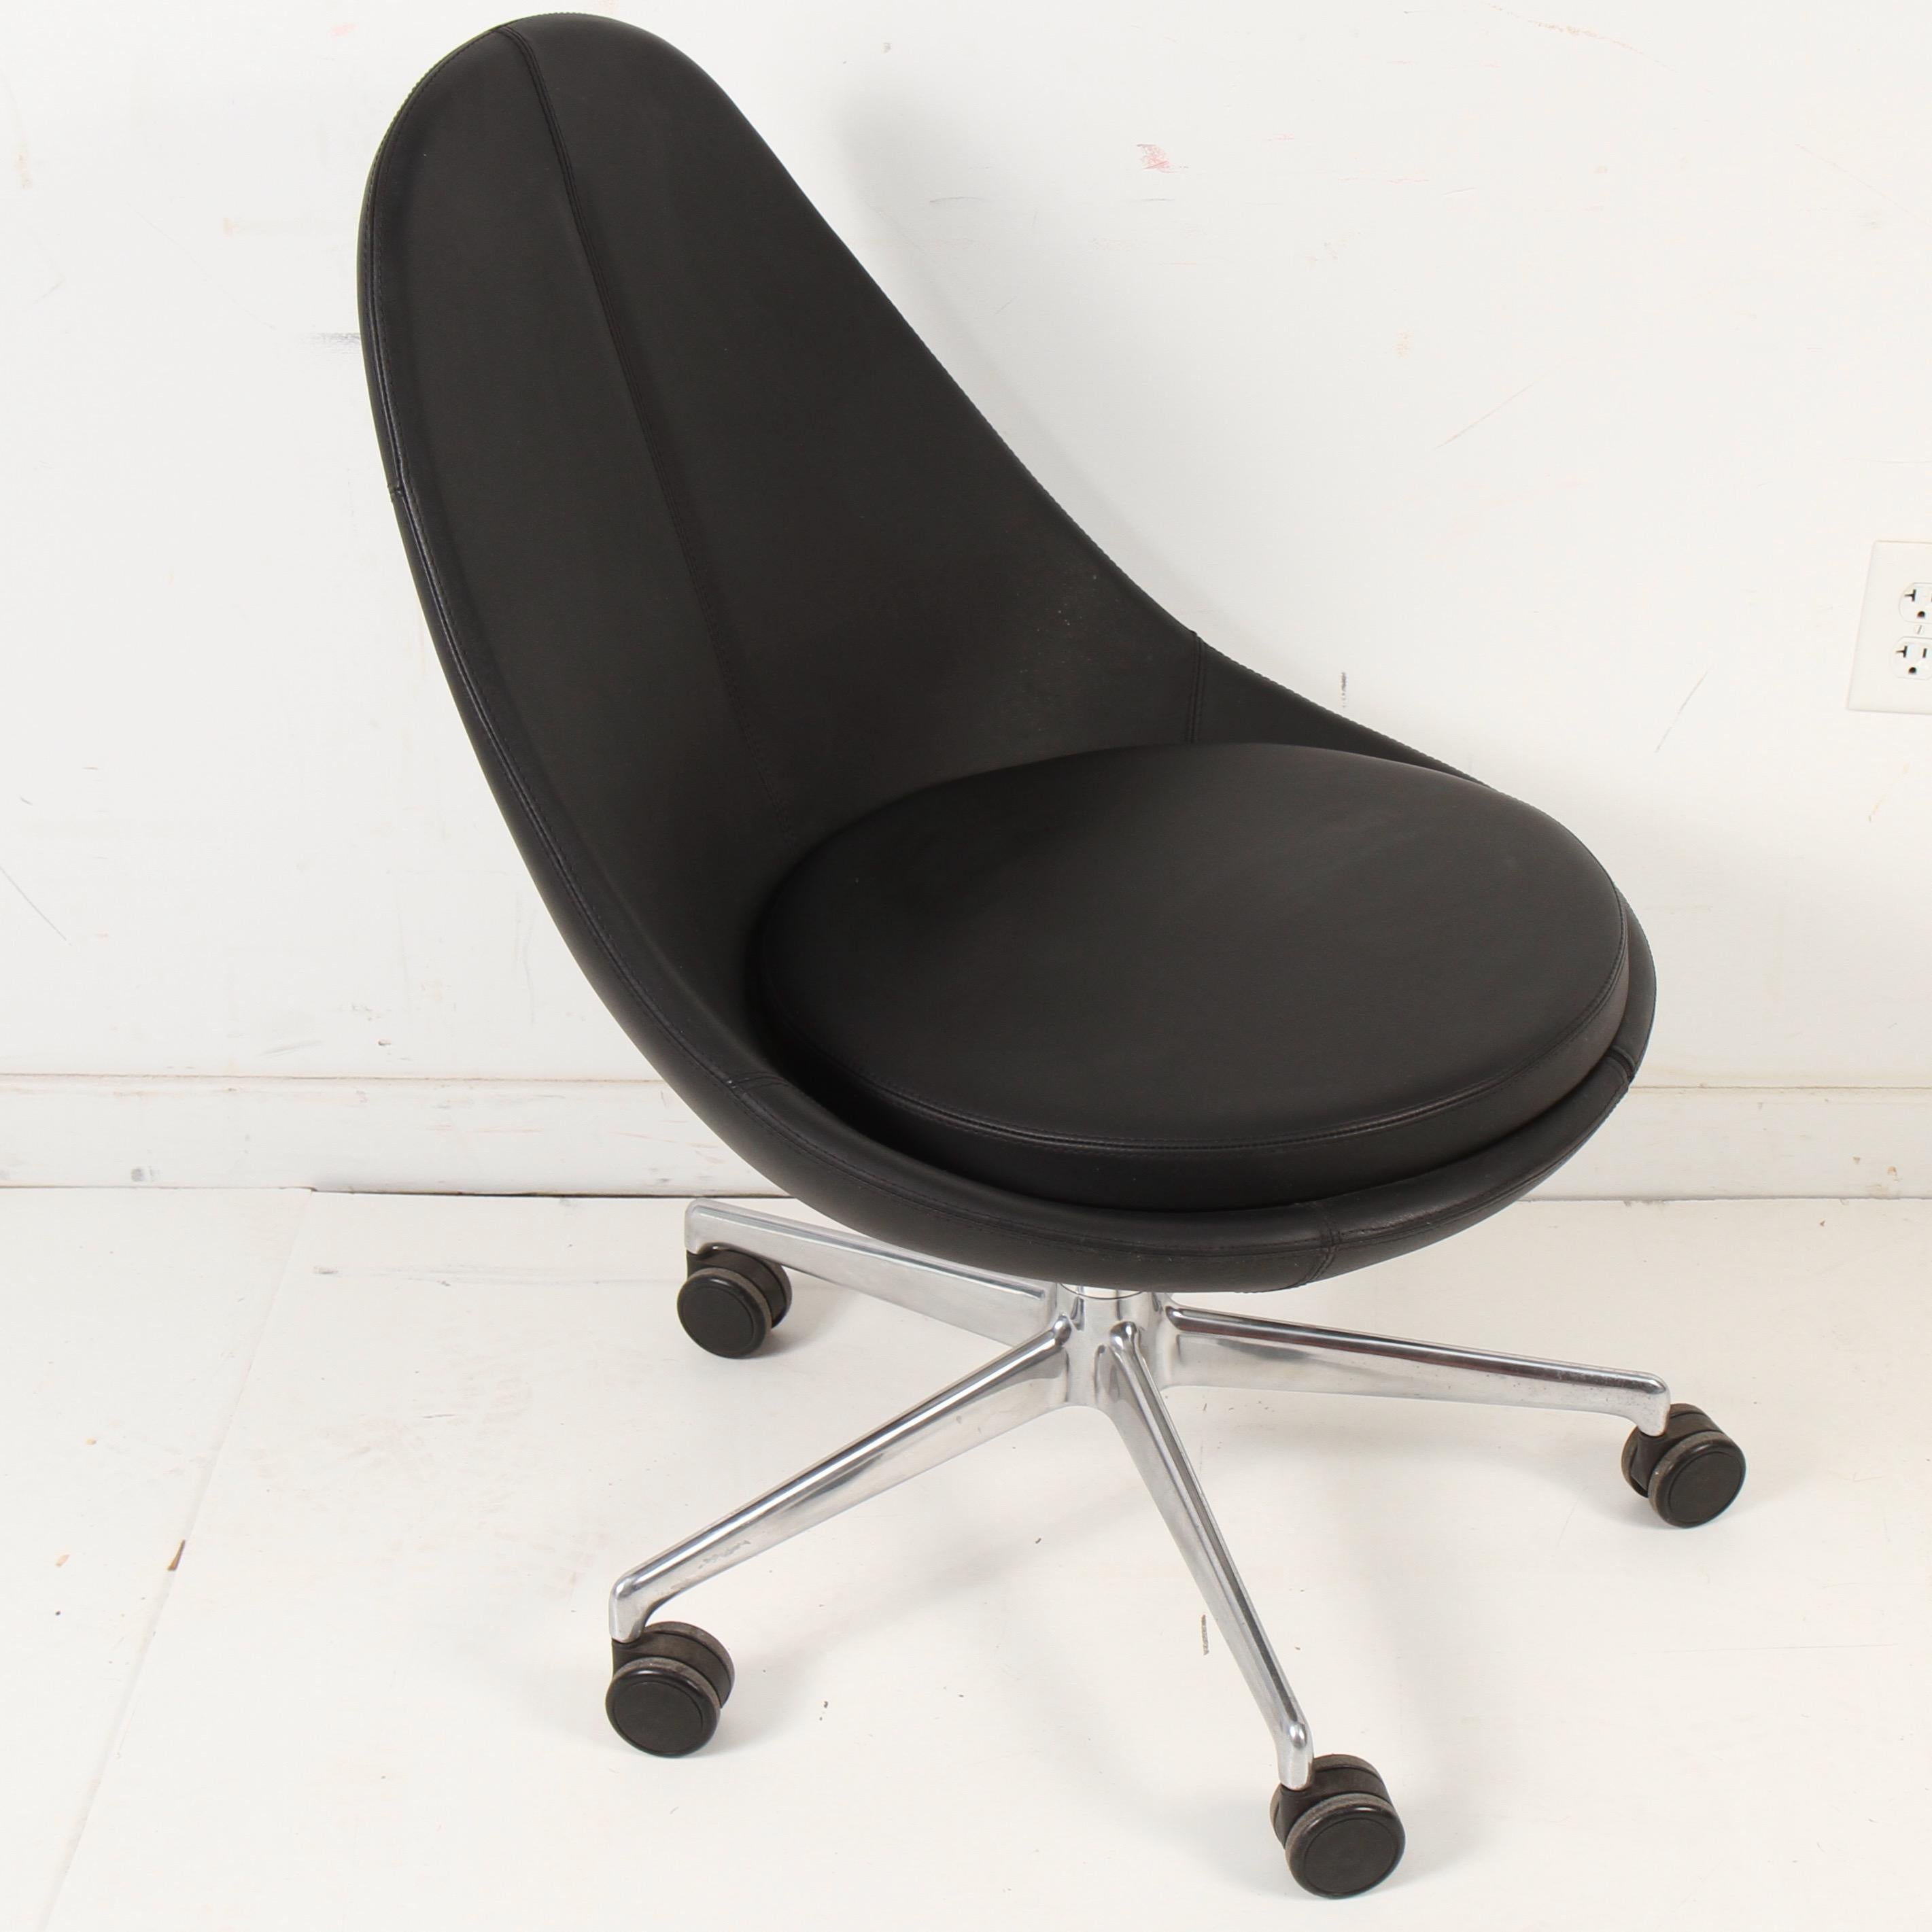 Very clean, very cool, very comfortable desk chair on castors by Canadian furniture maker Keilhauer.